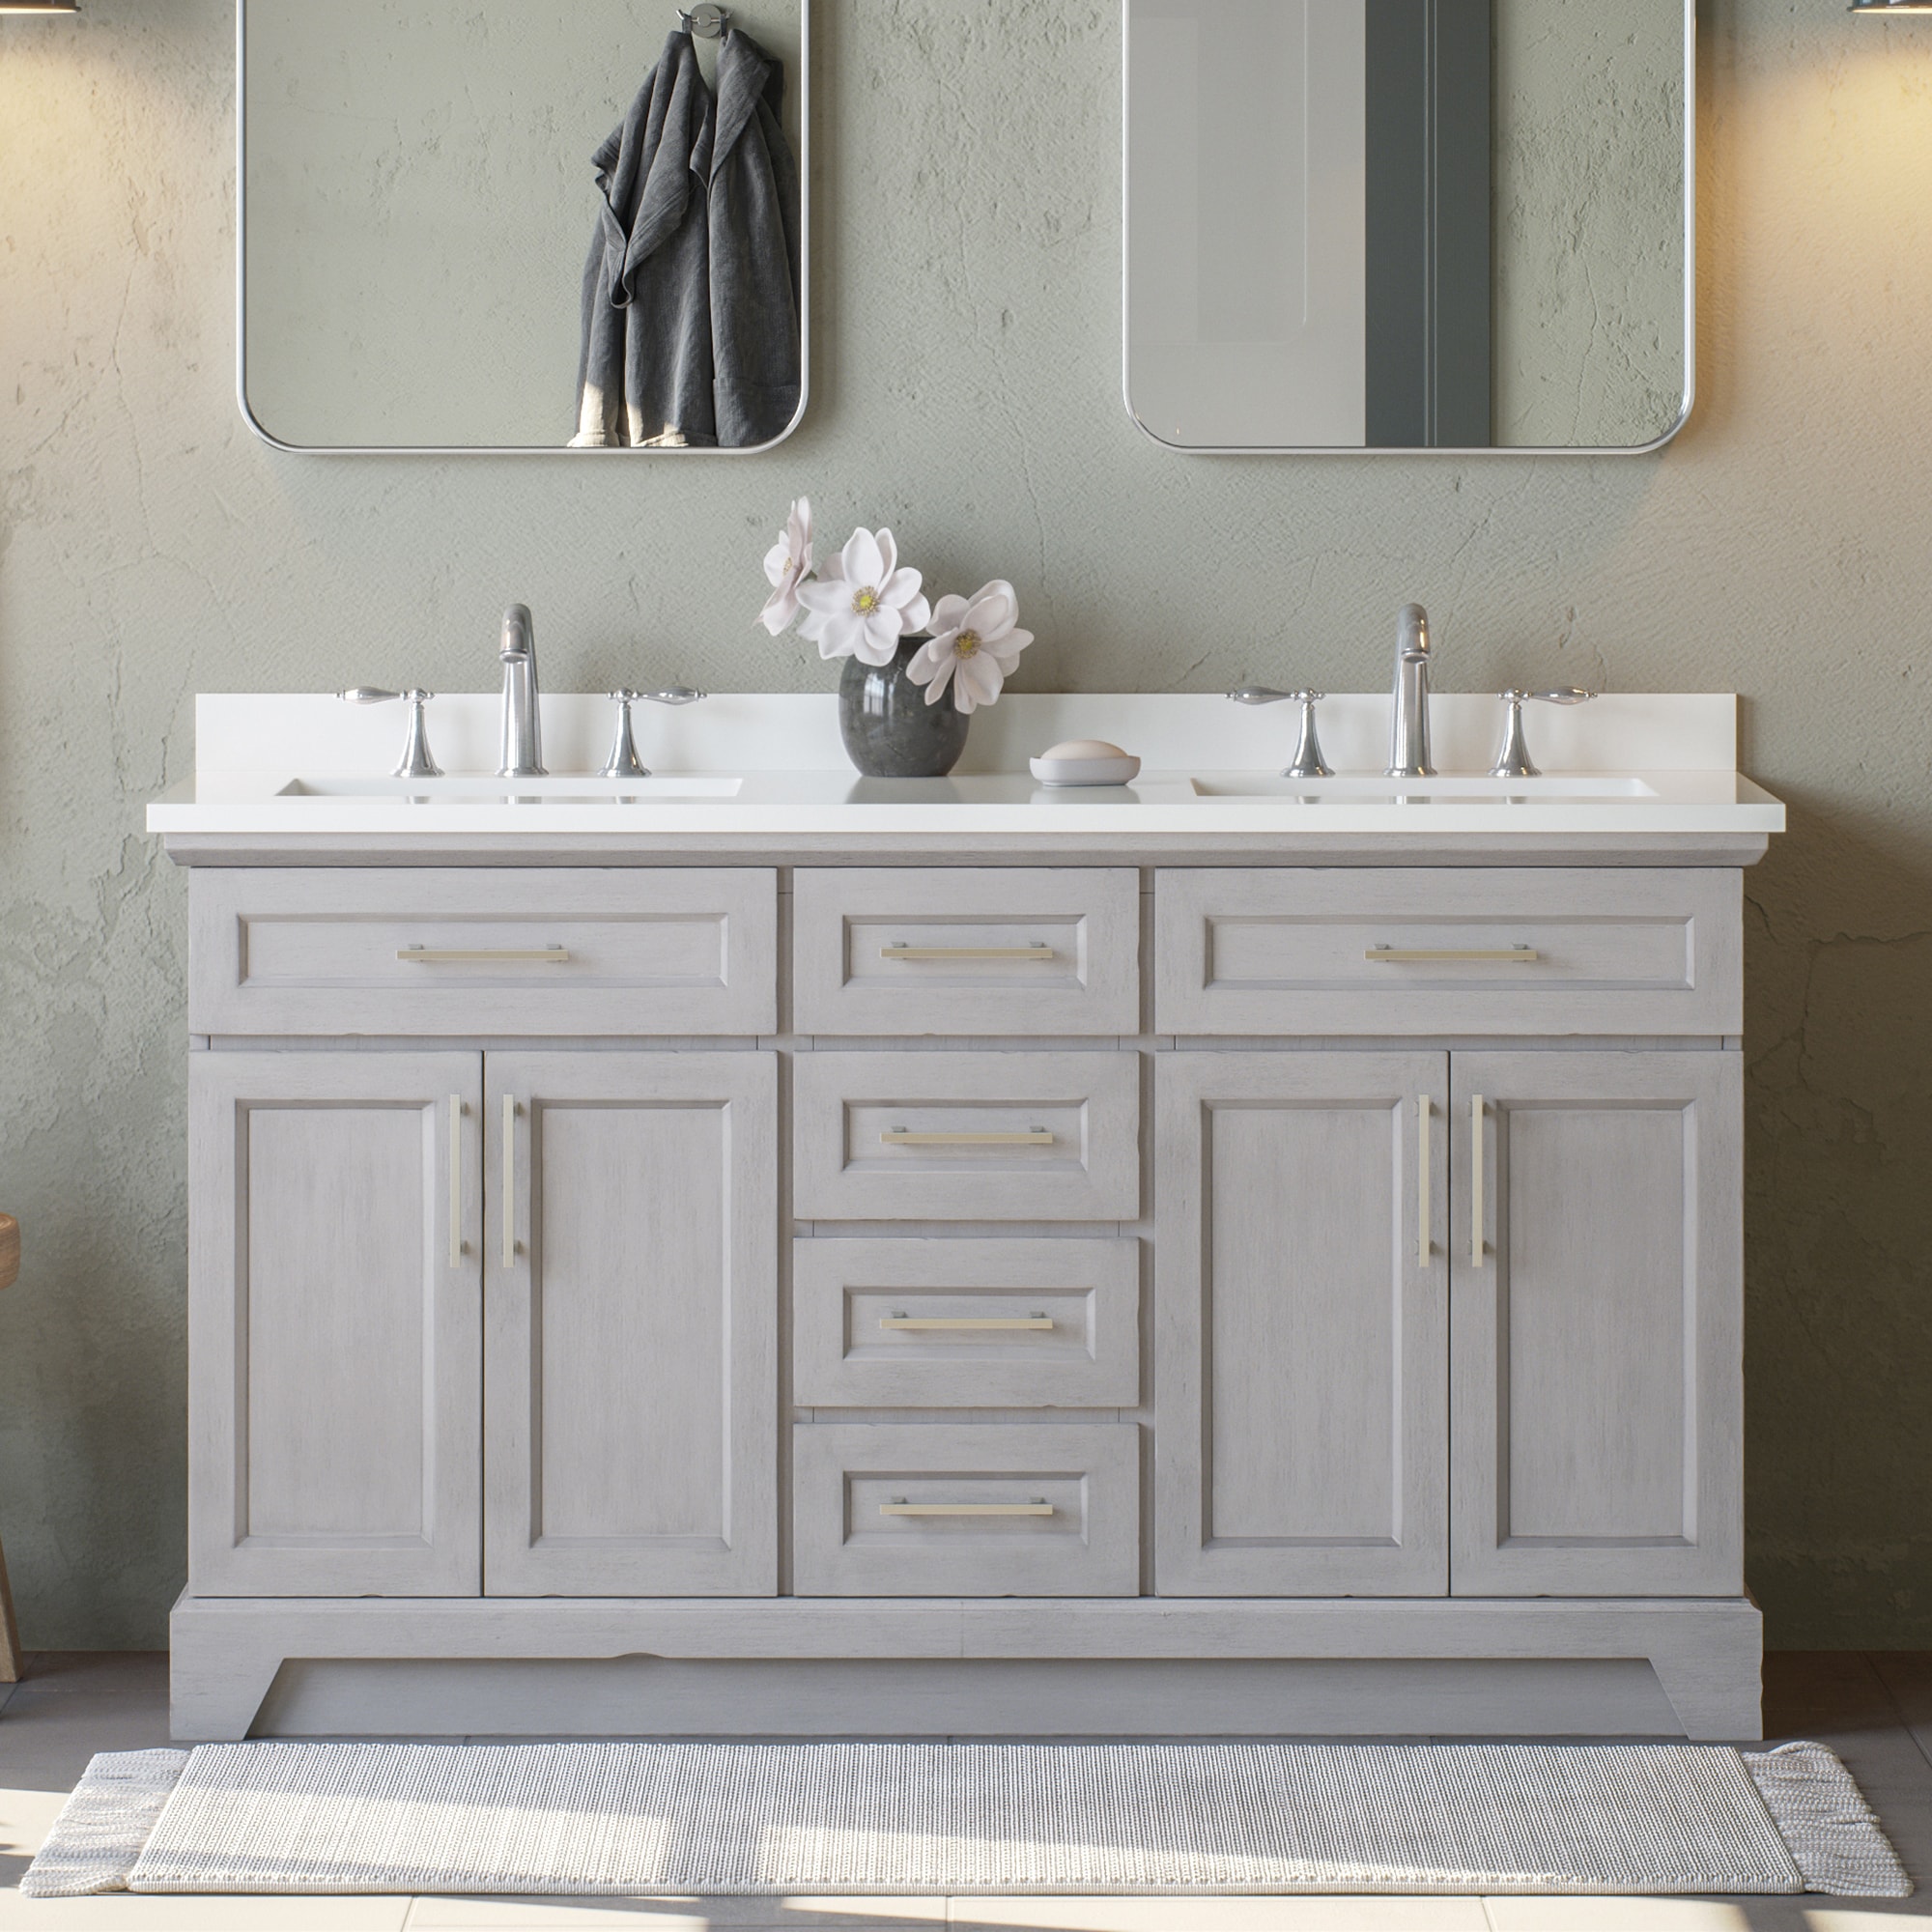 allen + roth Cabinetry Bathroom Cabinets